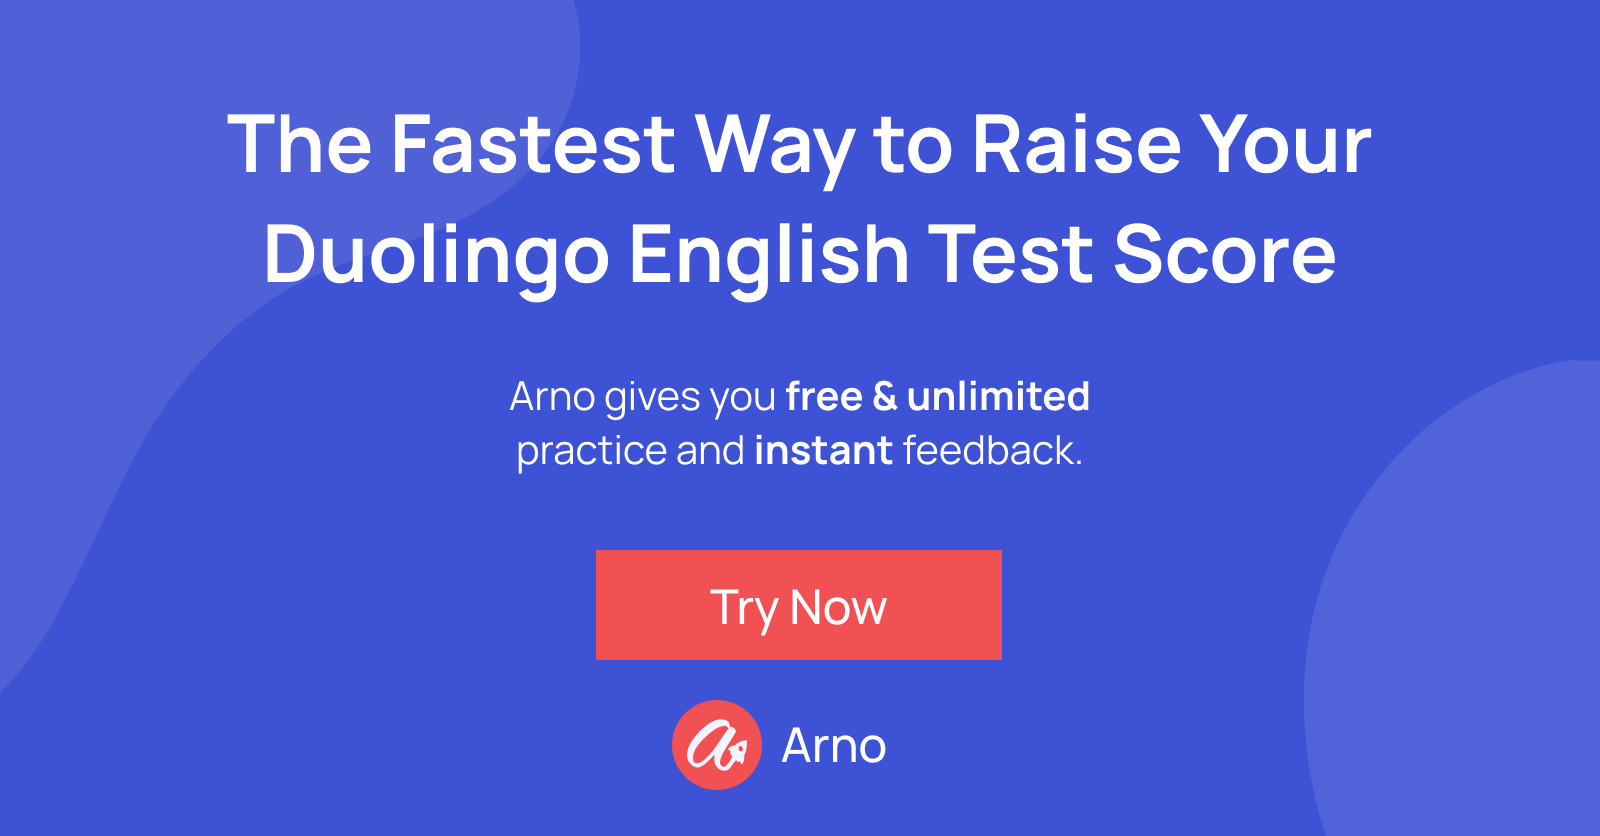 "Try Now" call to action for Arno”